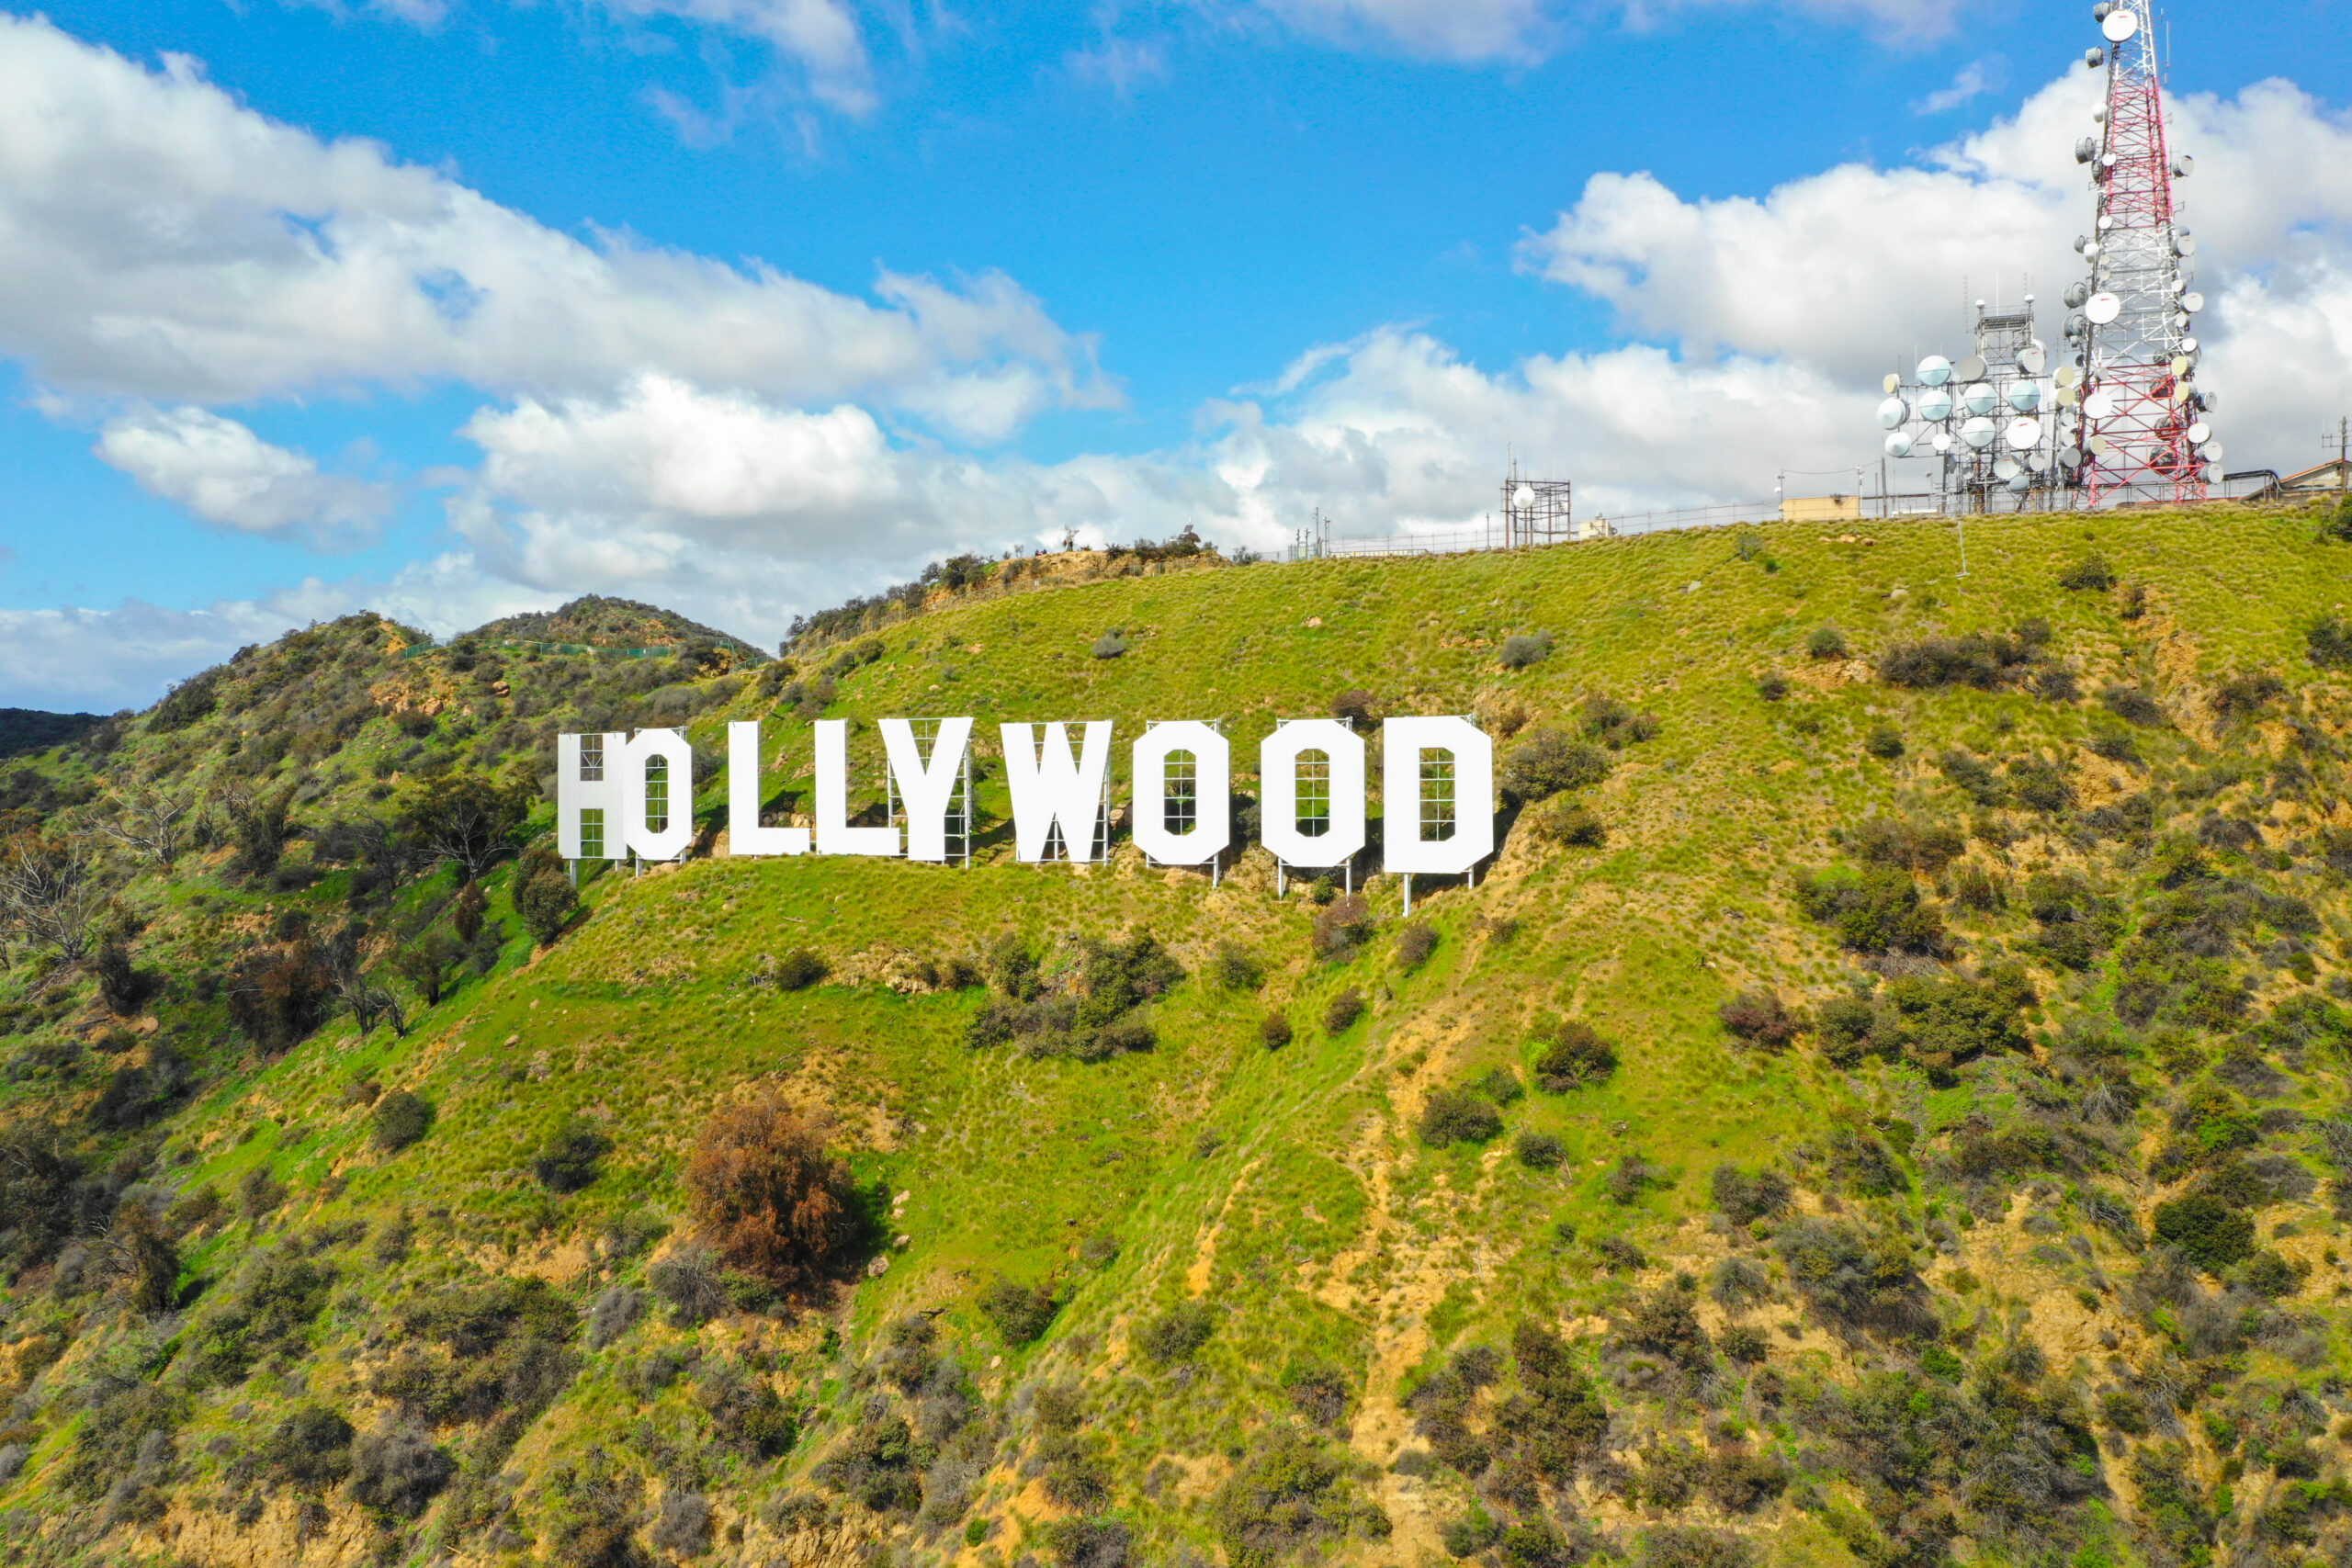 Hollywood sign board with mobile towers